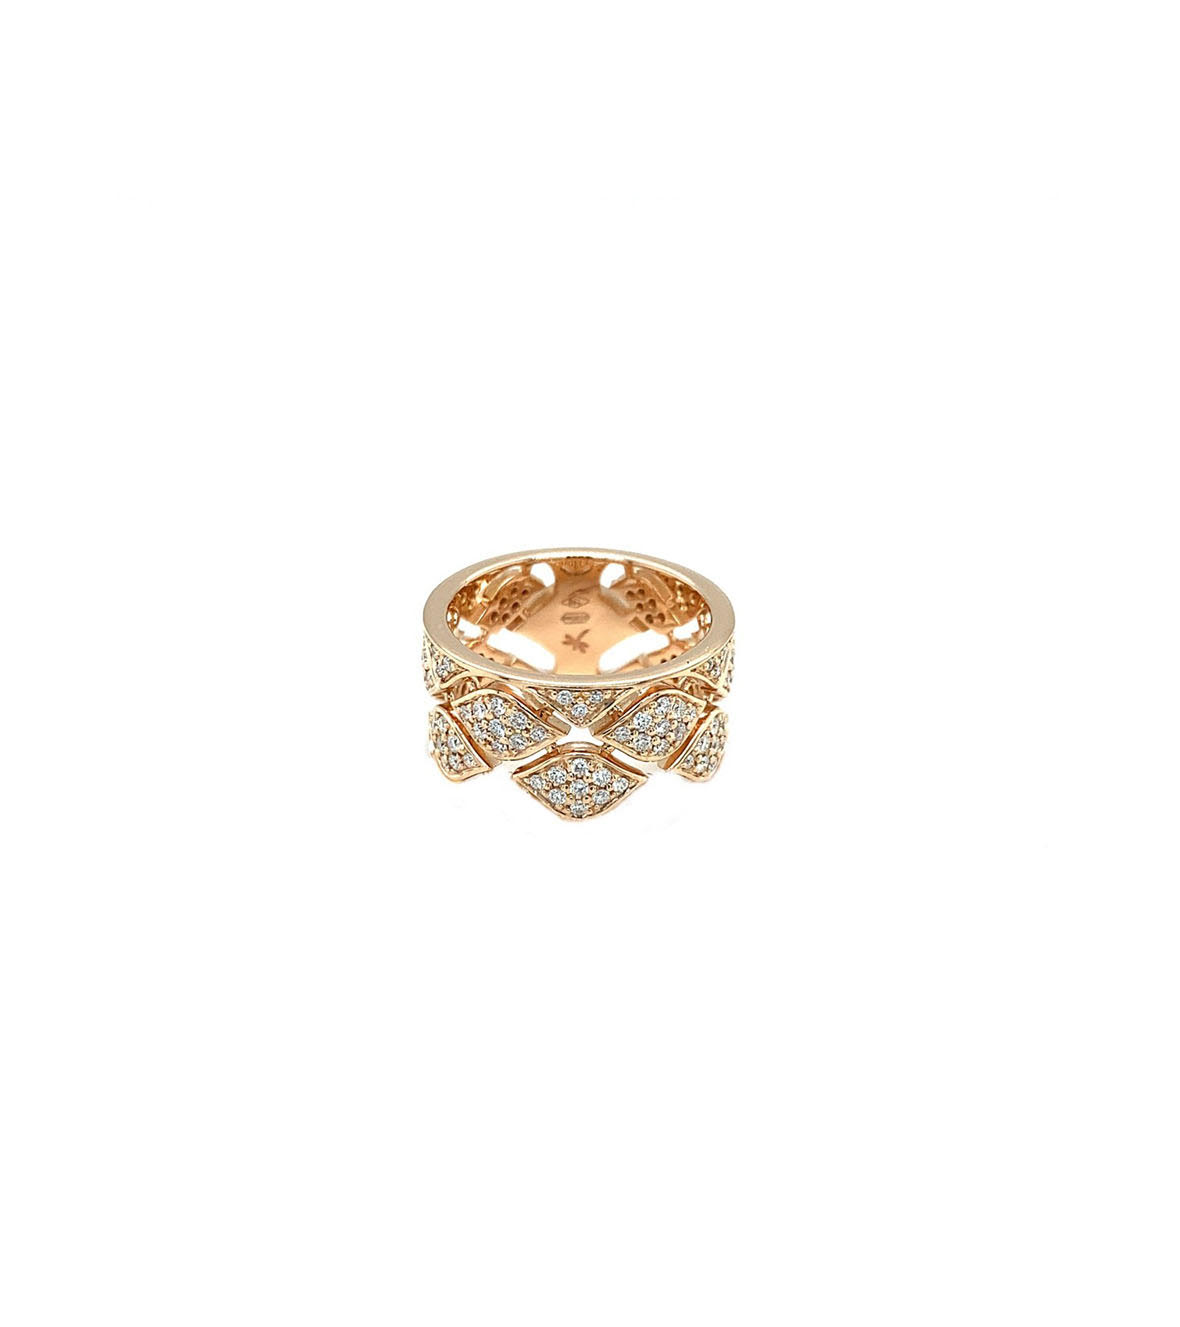 Ping Gold Ring with Diamonds MX1554BT by Casato 